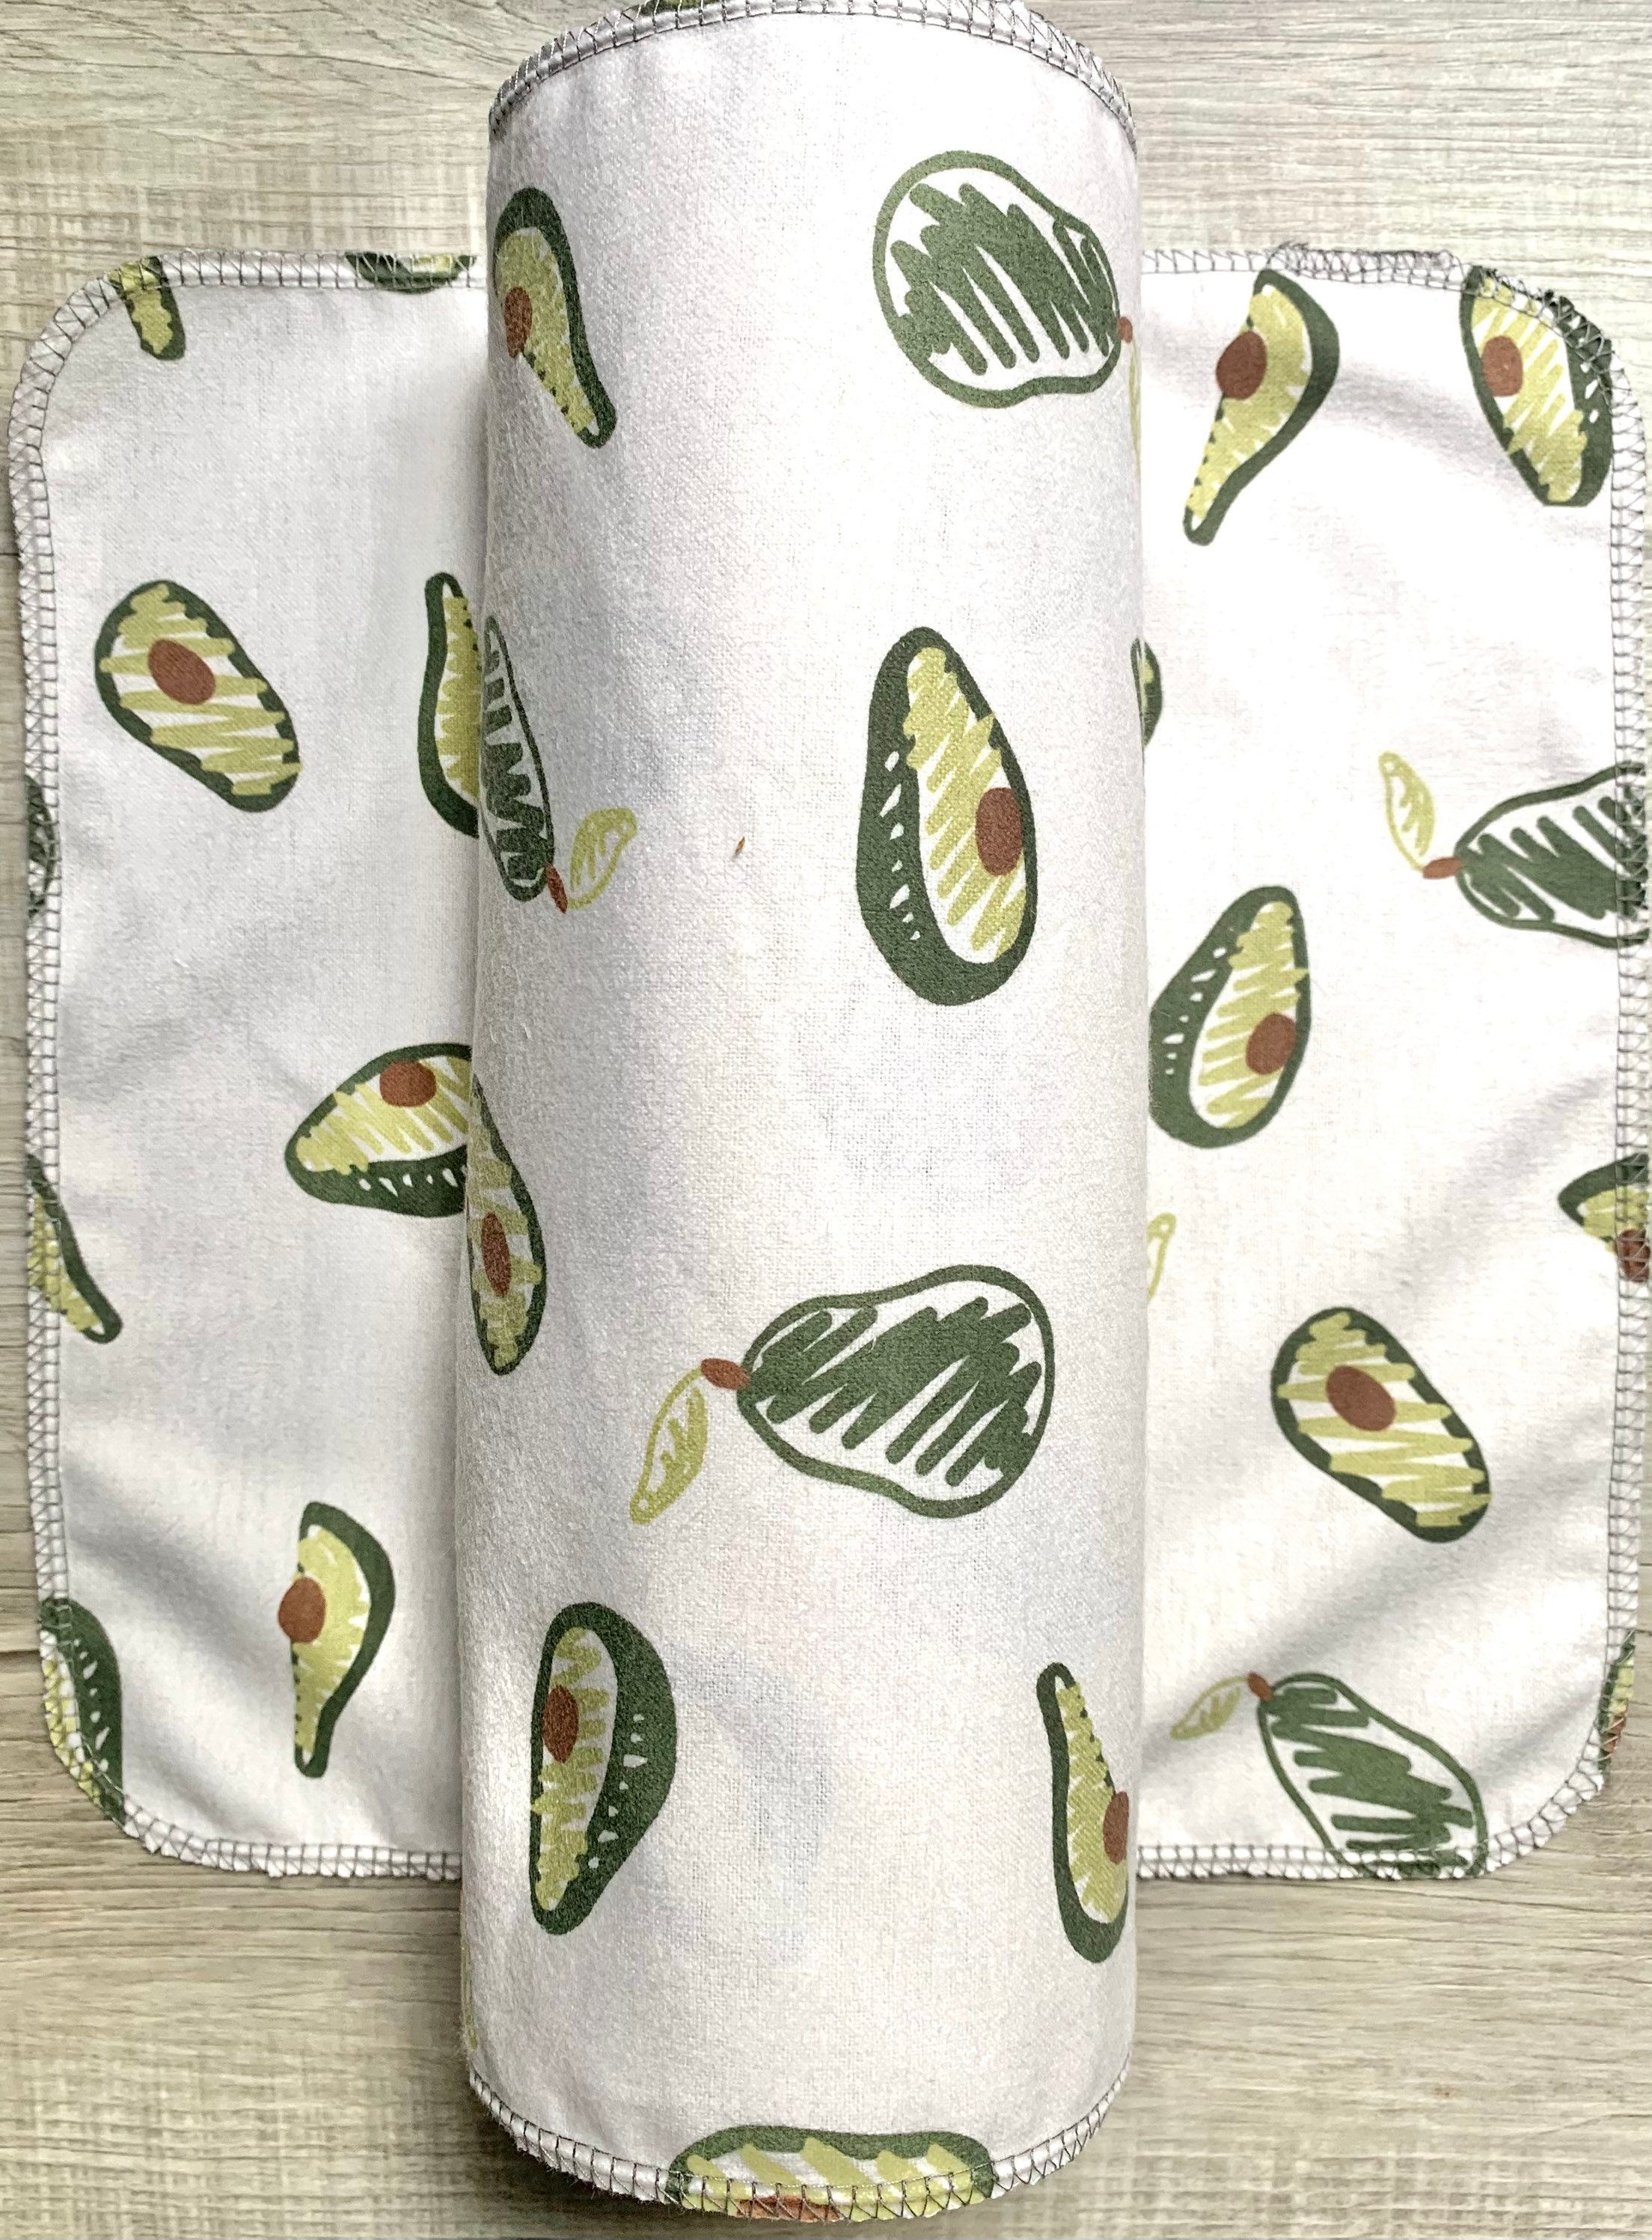 Avocado Paperless Towels Unpaper Towels Eco Sustainable Zero Waste Kitchen  12x12 Sheets 